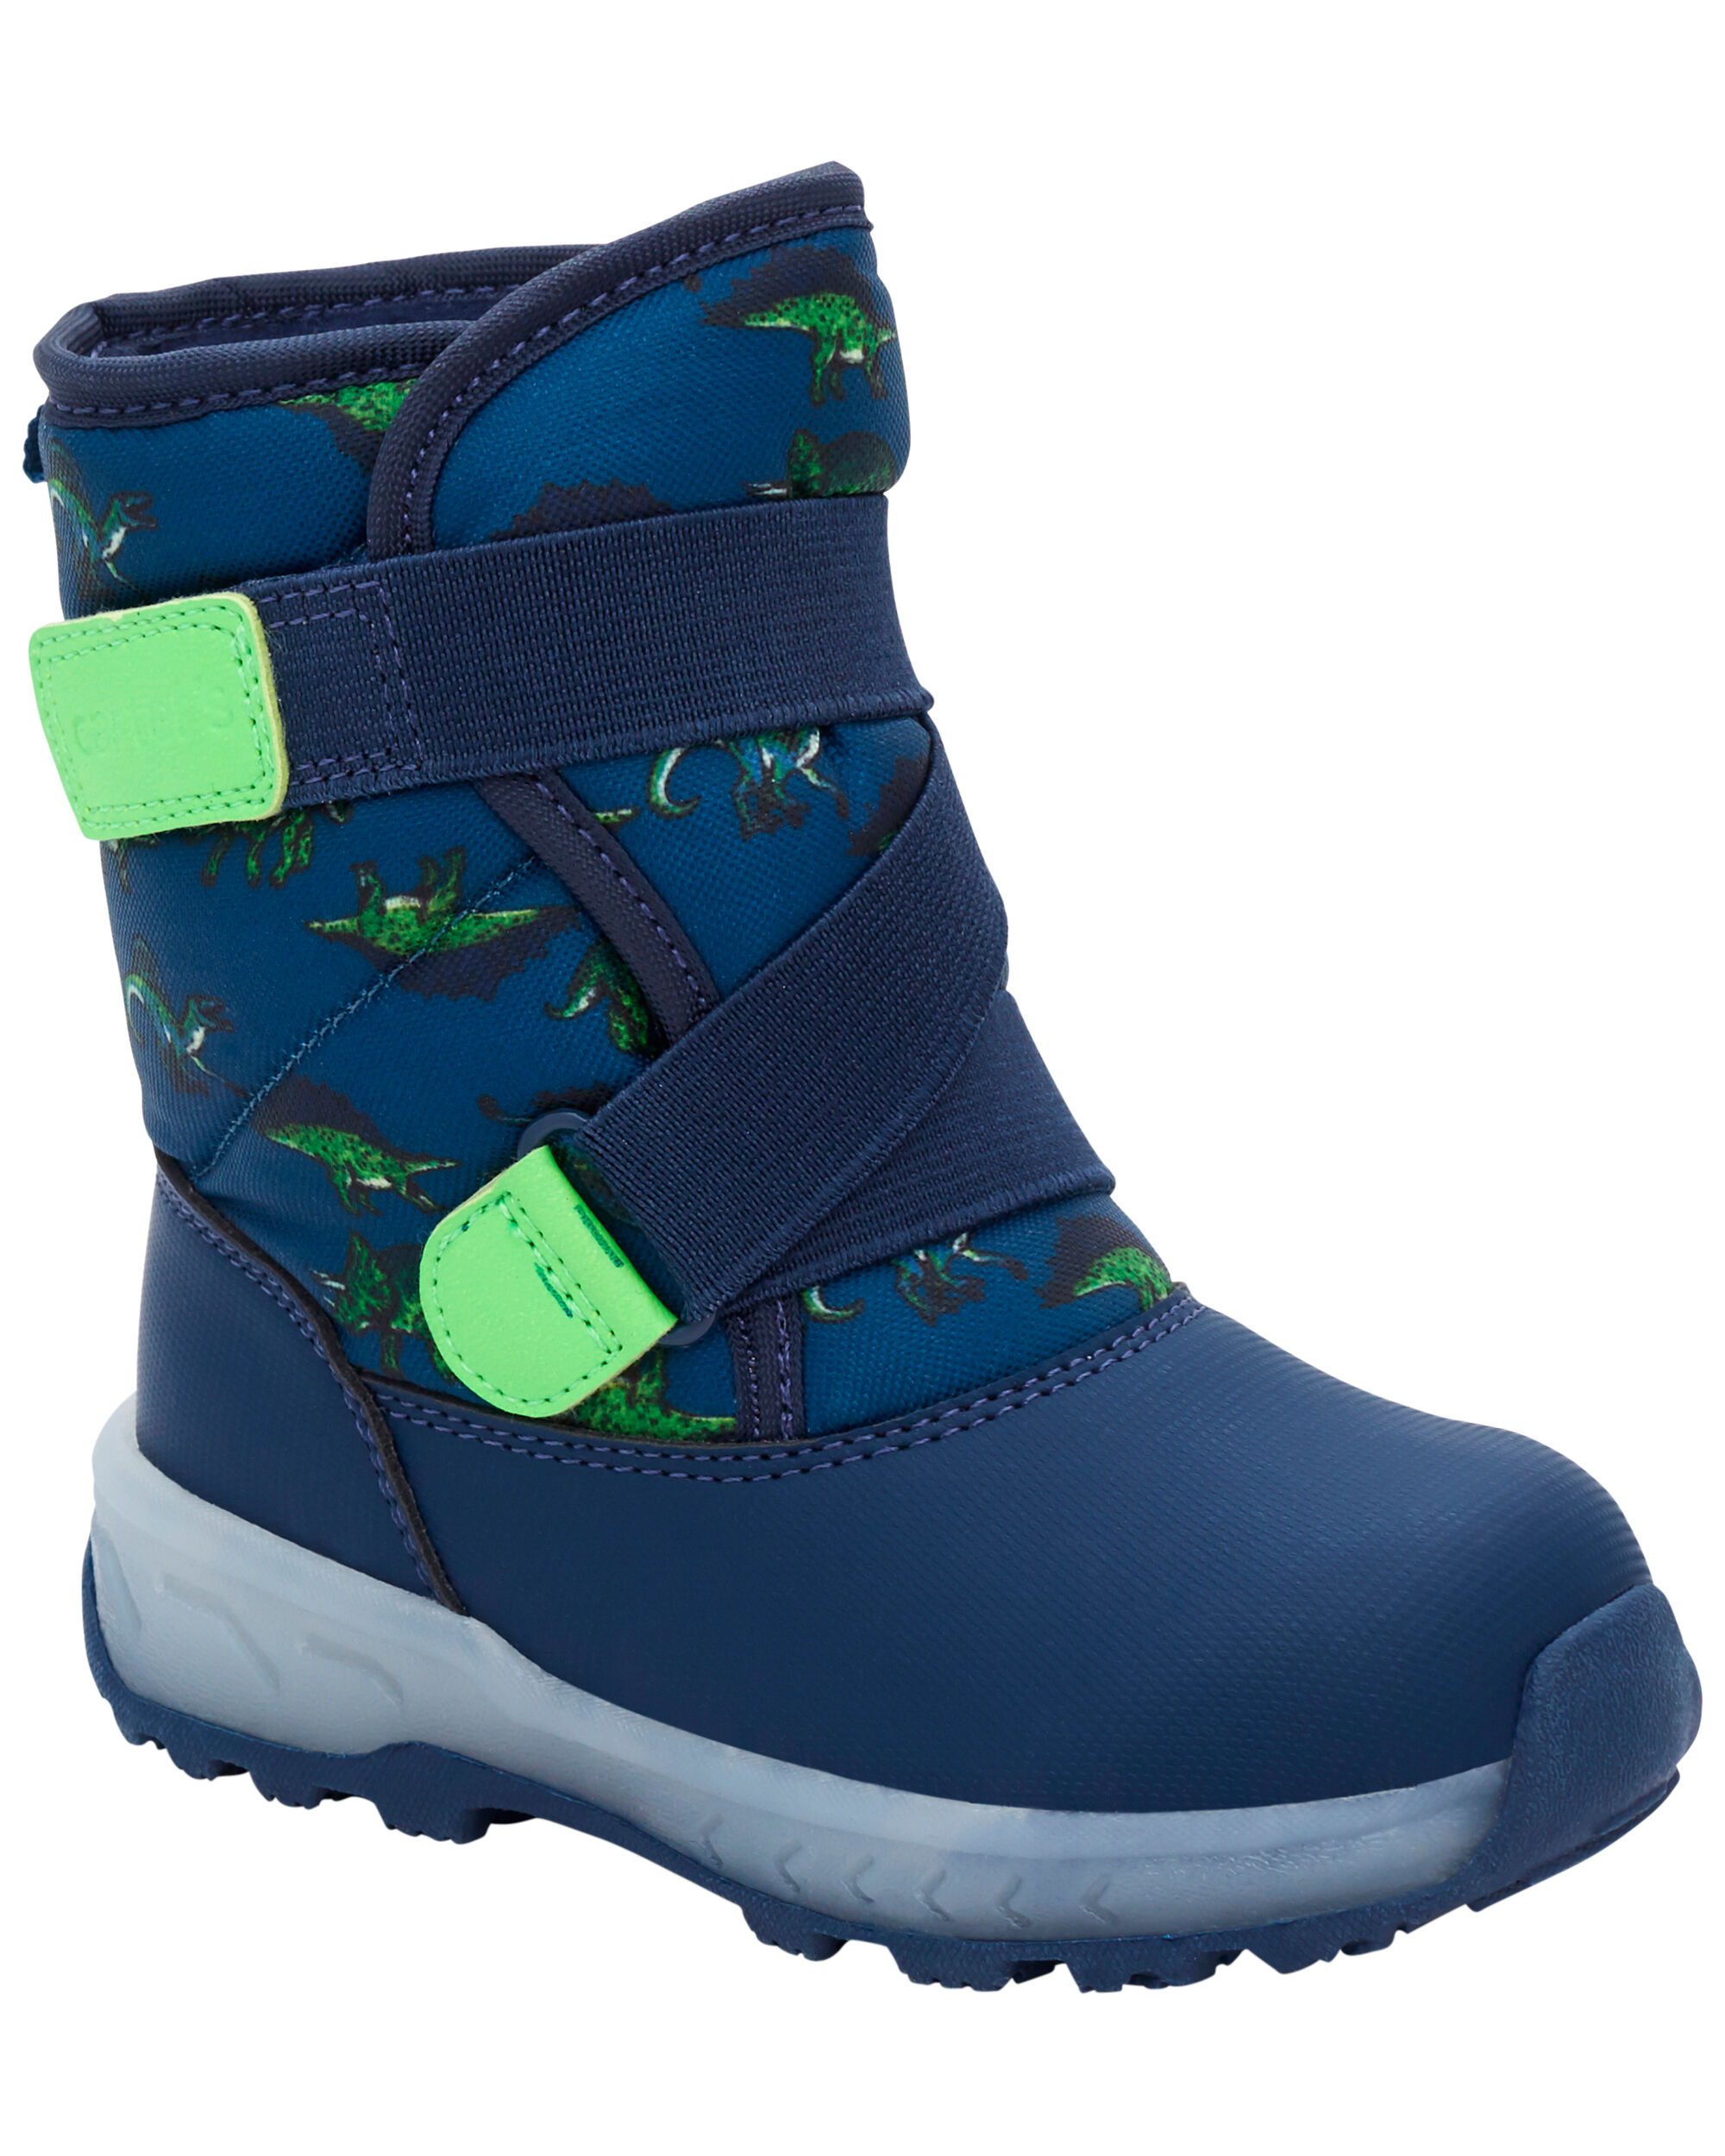 Carters Kids New Snow Boot 